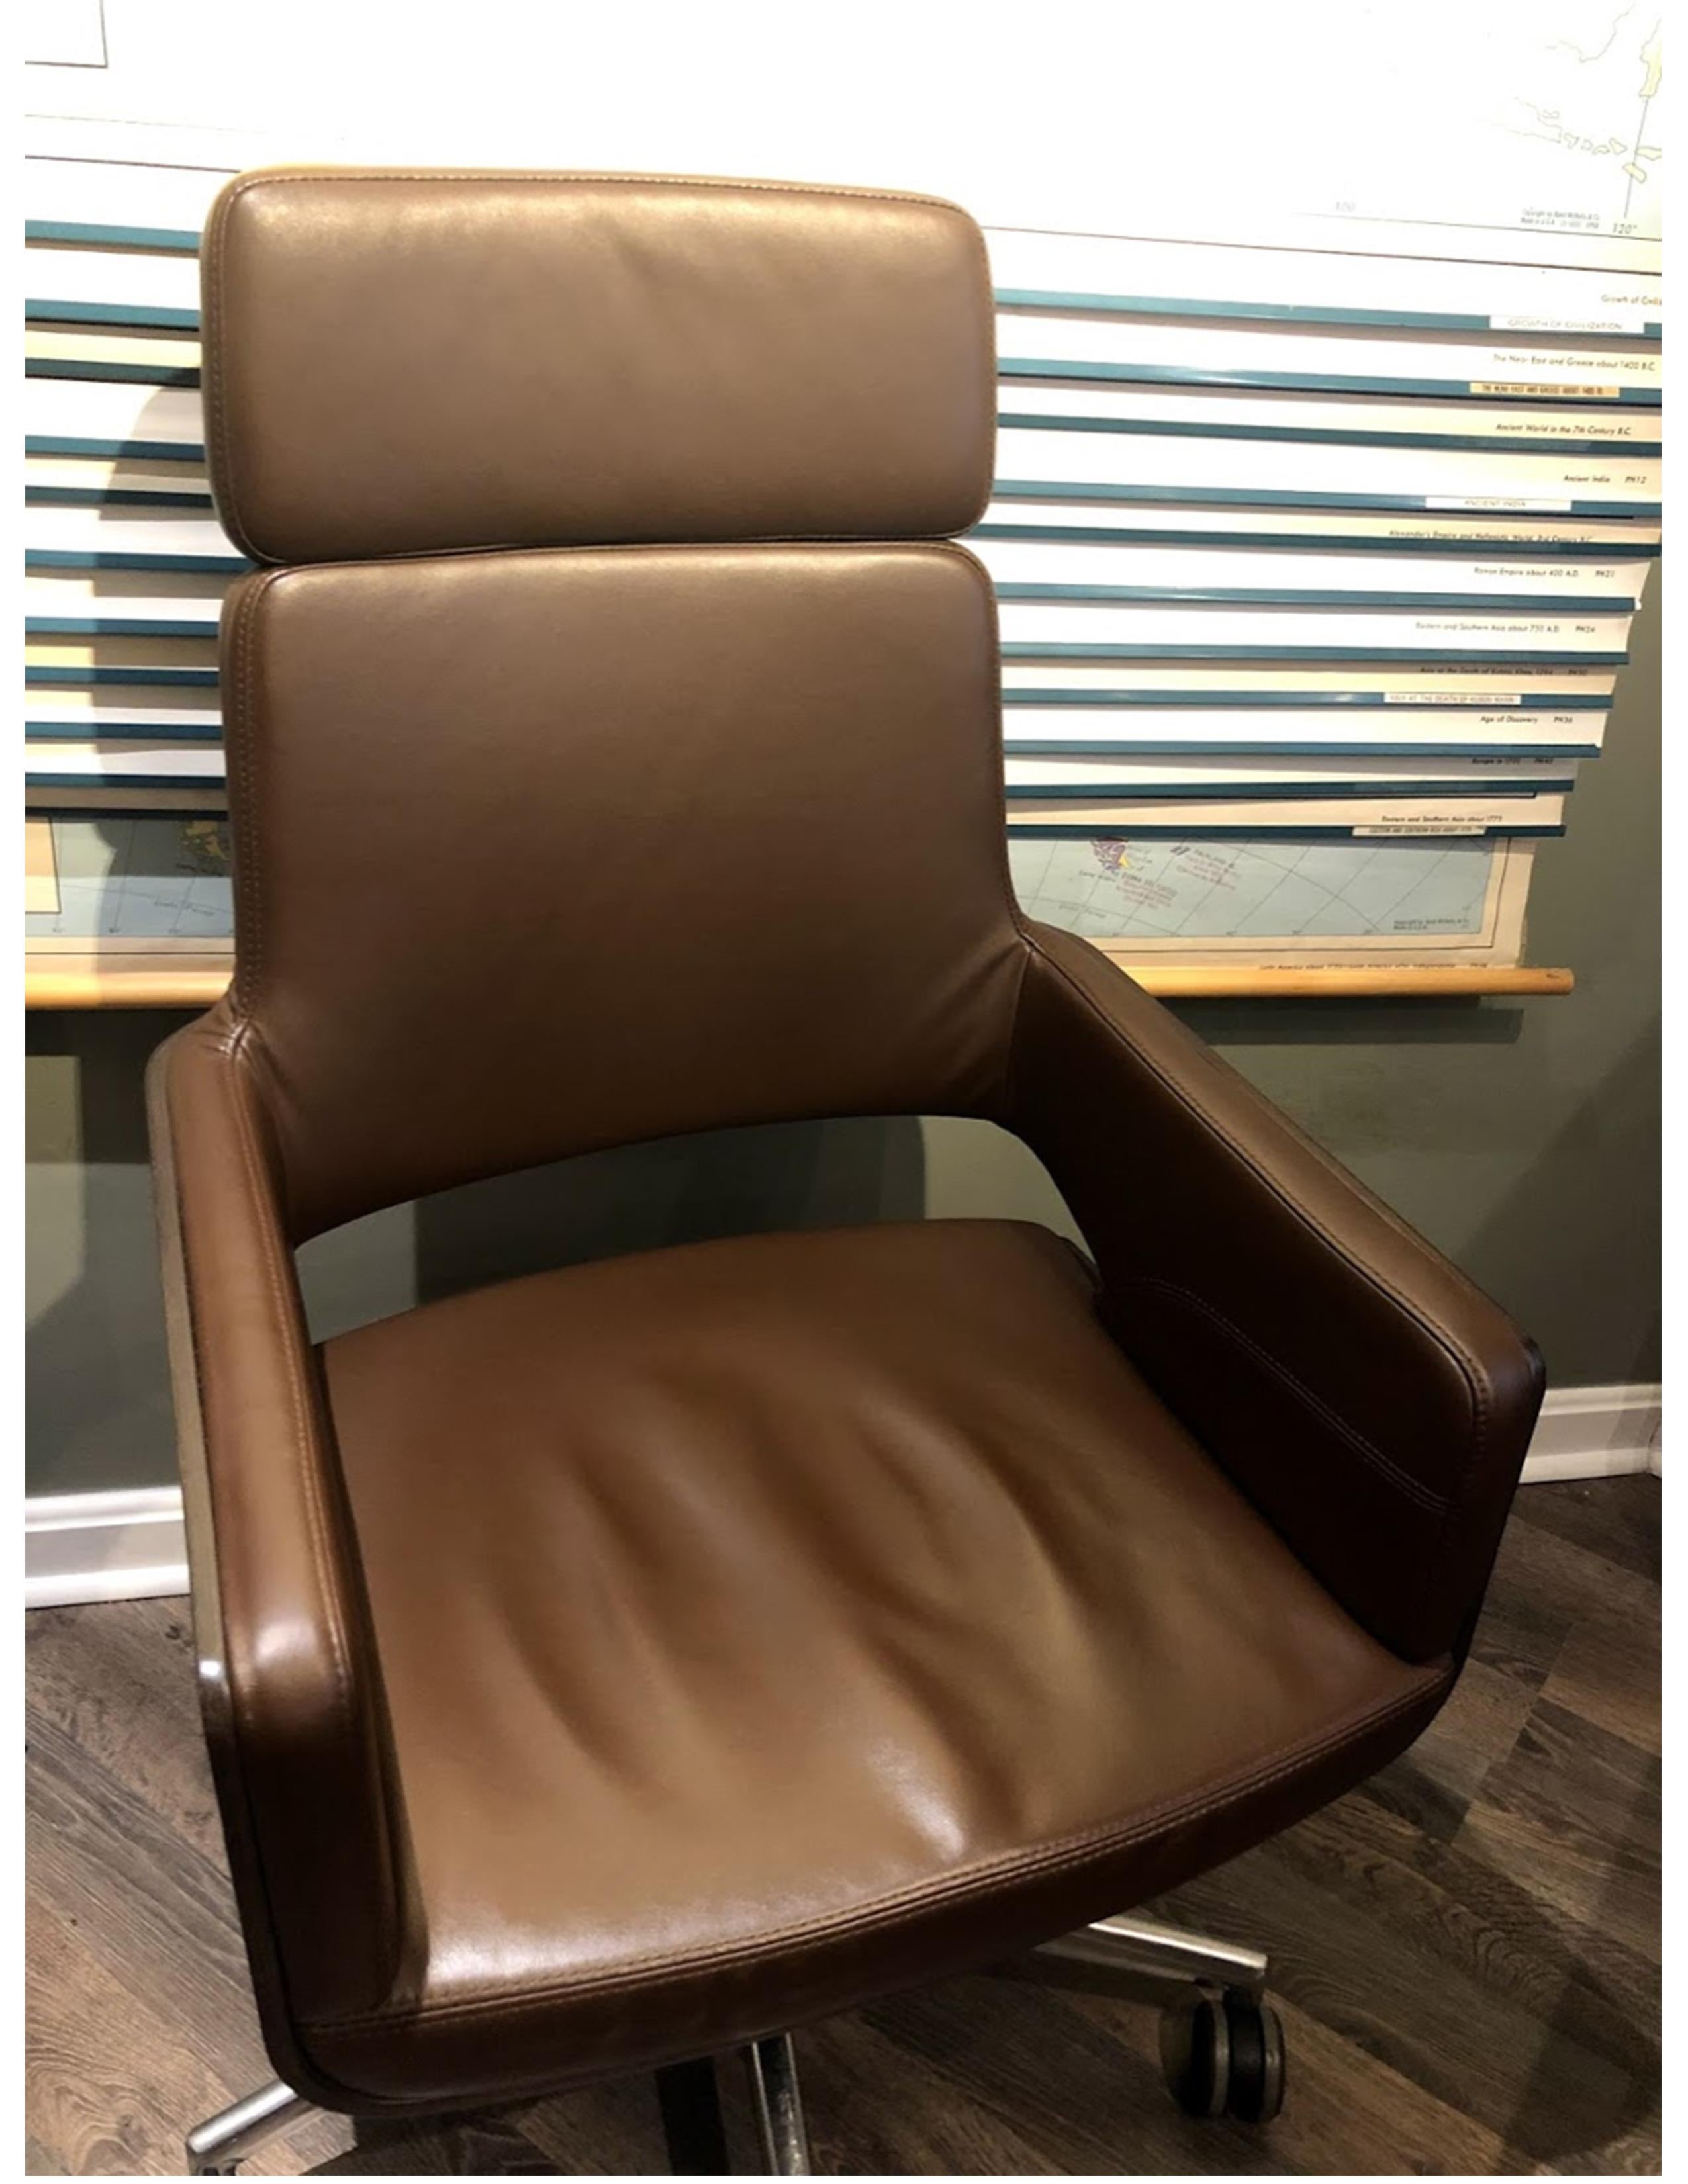 High-quality visitor's and conference chair with a special aesthetic appeal. Its unique characteristic is the accentuated separation of shell and frame. The molded plywood seat shell has formal analogies to automobile design in the shape of the